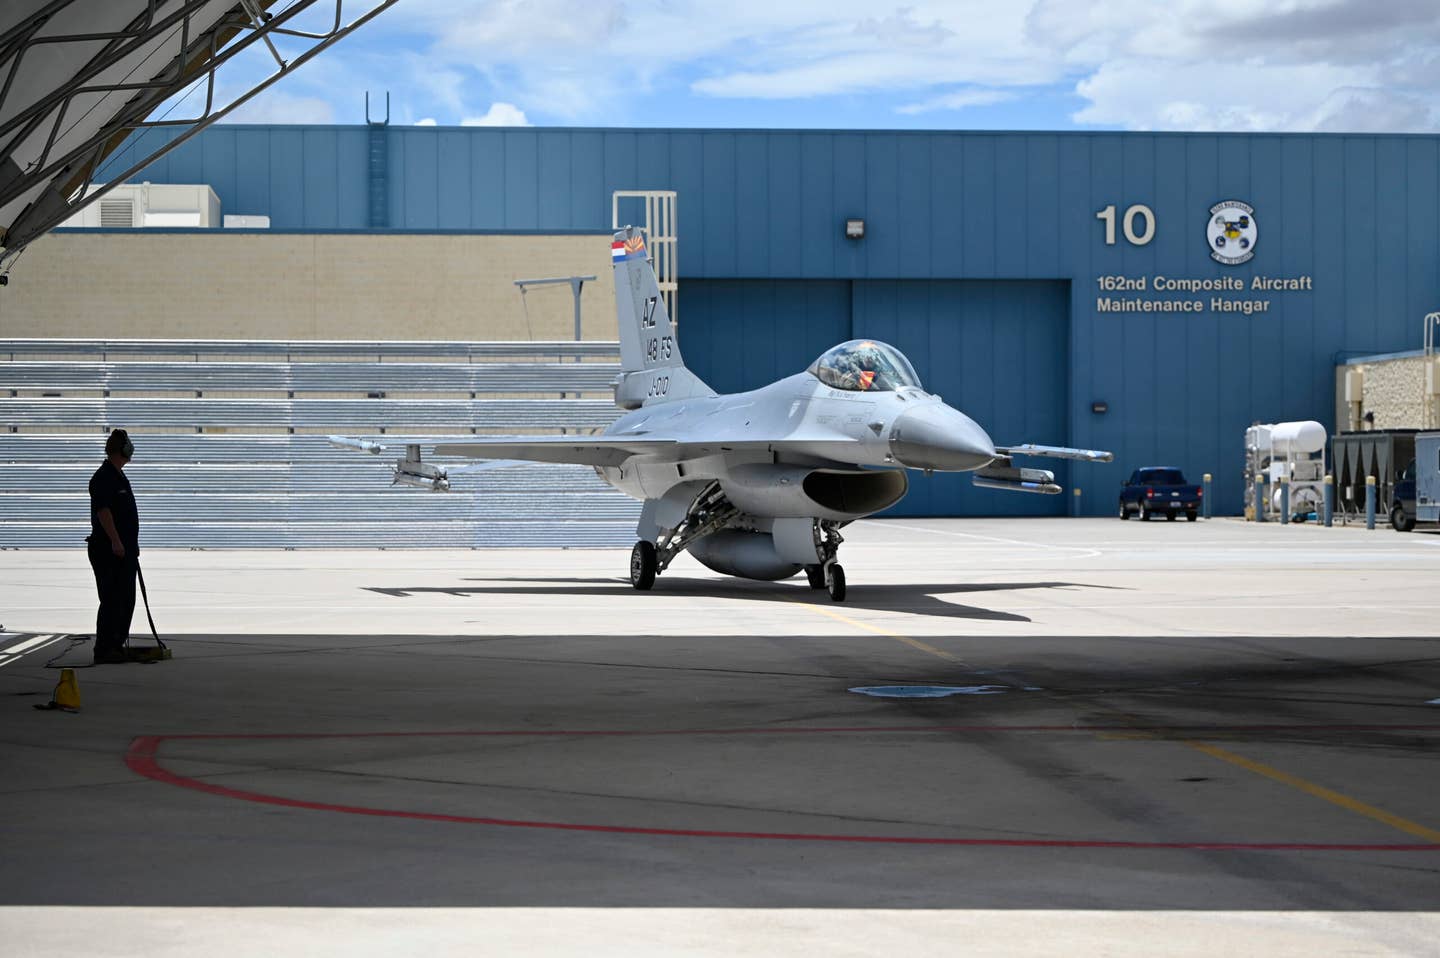 An F-16 crew chief from the 162nd Wing at Morris Air National Guard Base in Tucson monitors an F-16 as it parks before engine shutdown. <em>U.S. Air National Guard photo by Maj. Angela Walz</em>